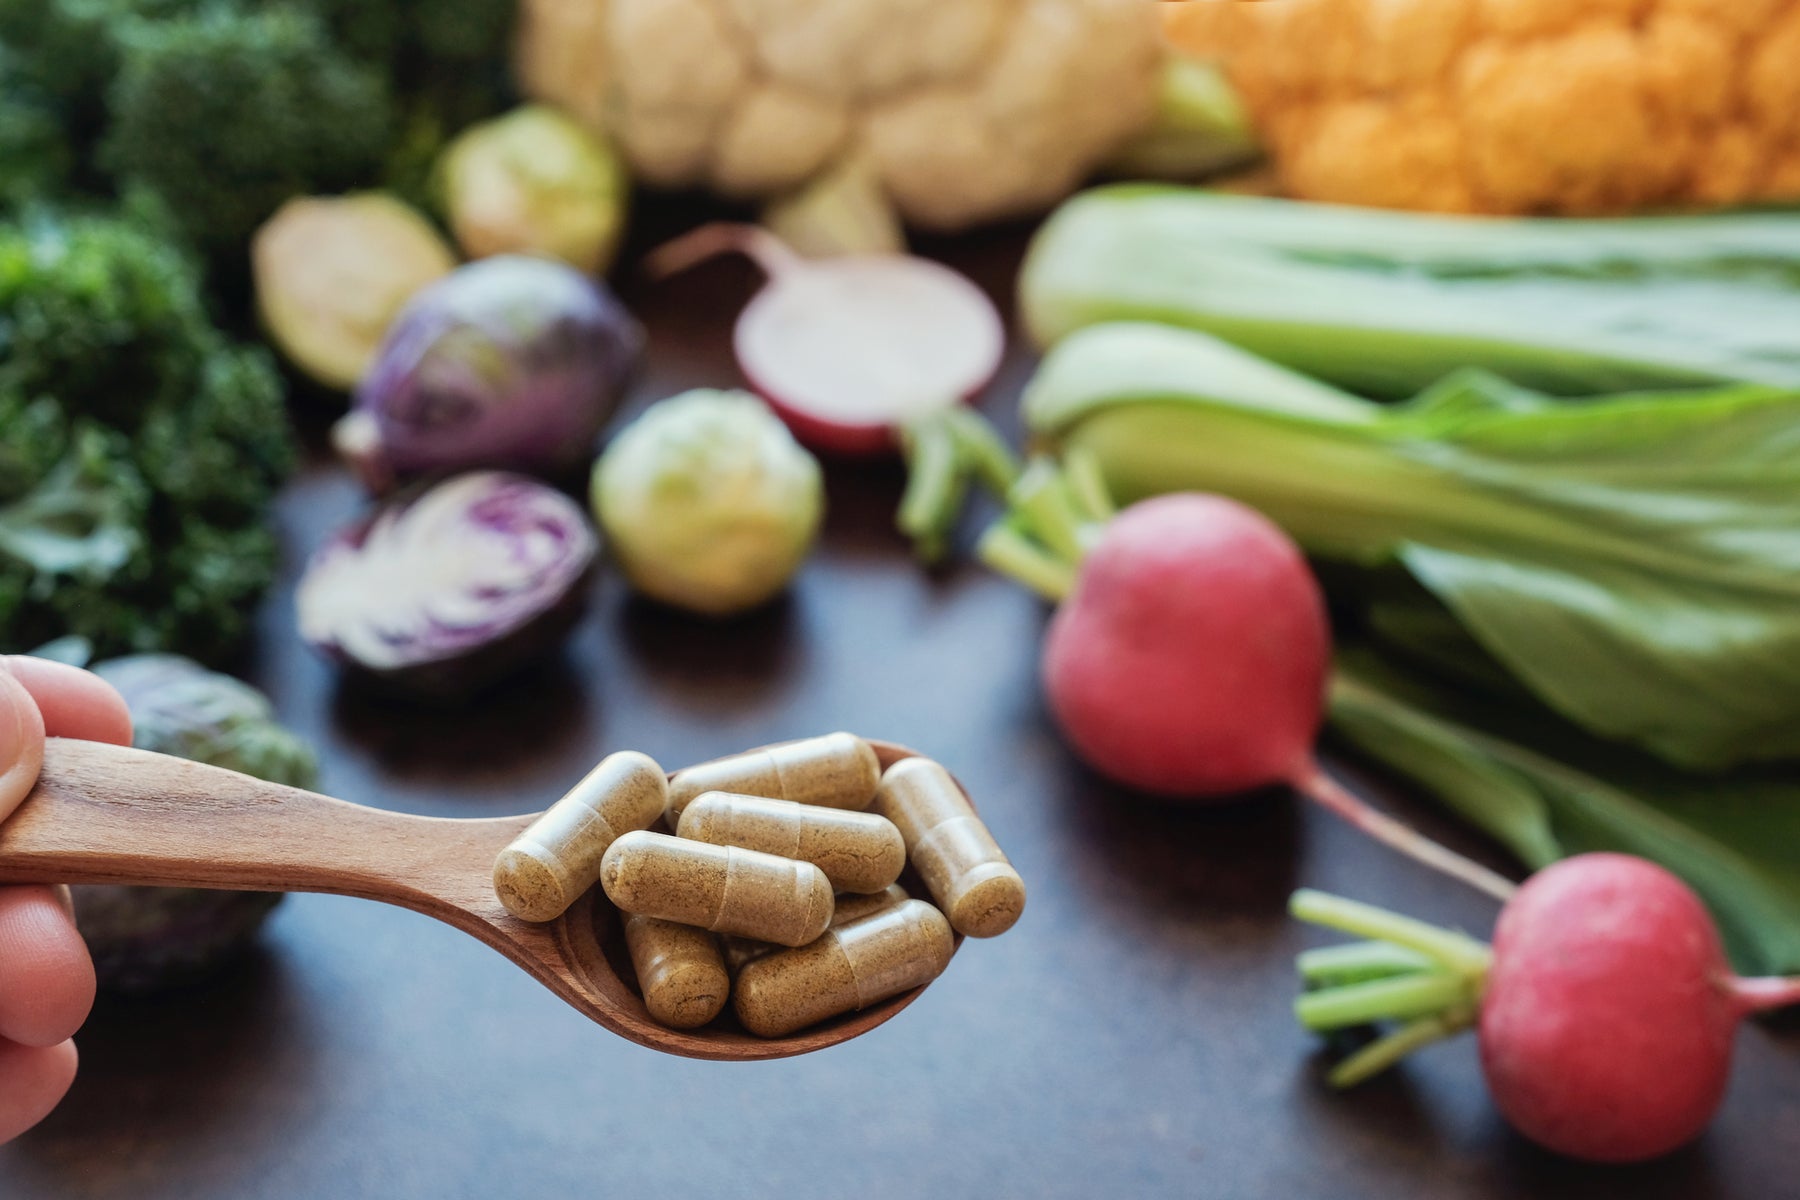 The benefits of taking vitamins and supplements for overall health and wellness